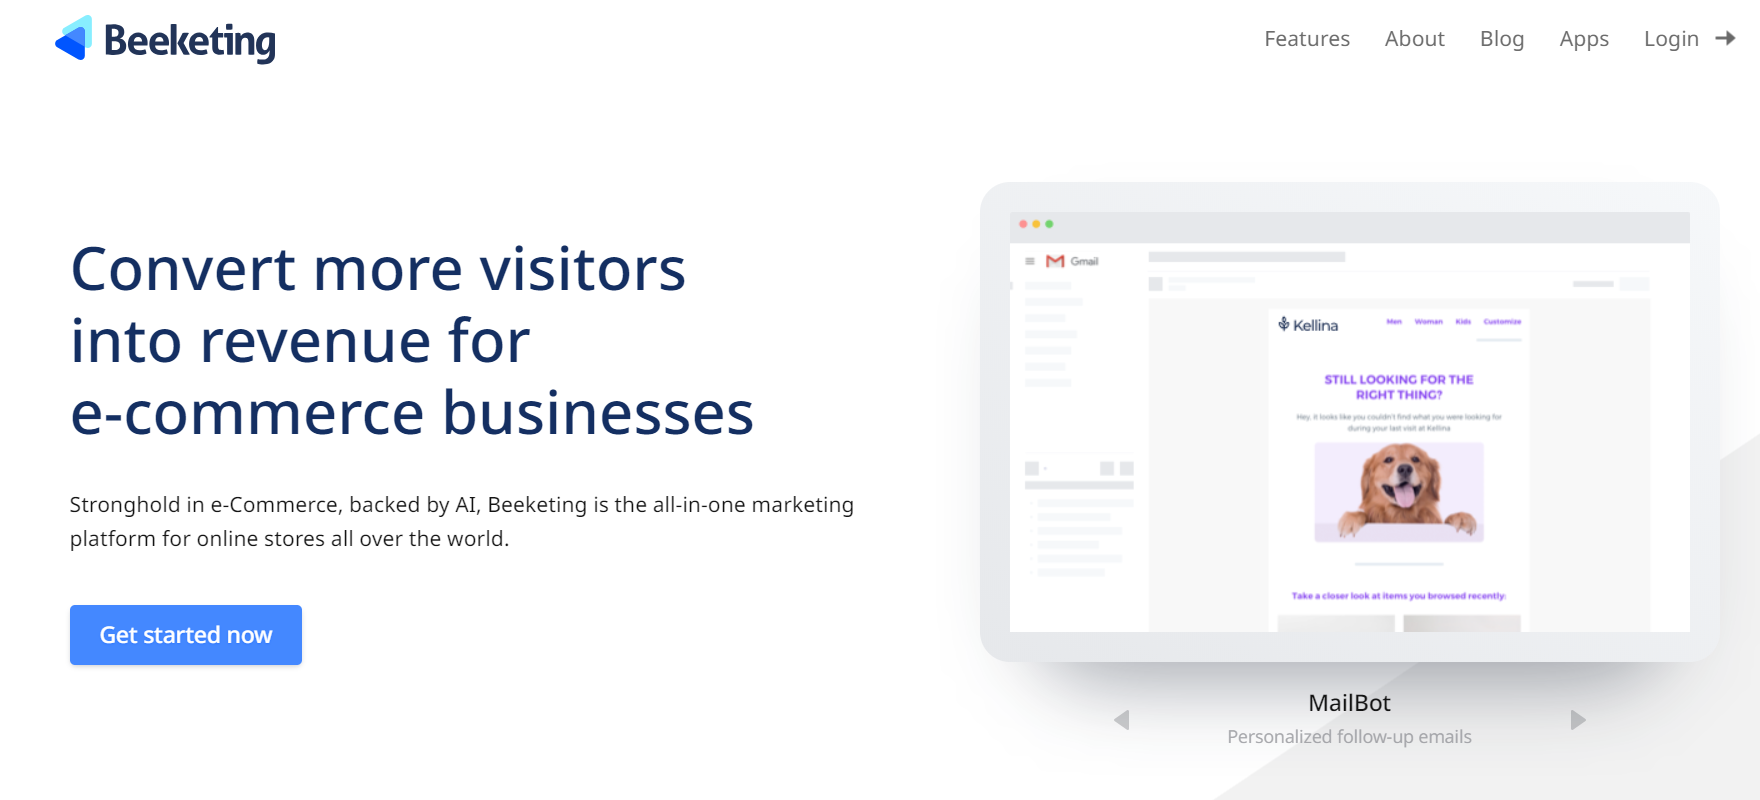 Beeketing App Review- Marketing Automation for eCommerce